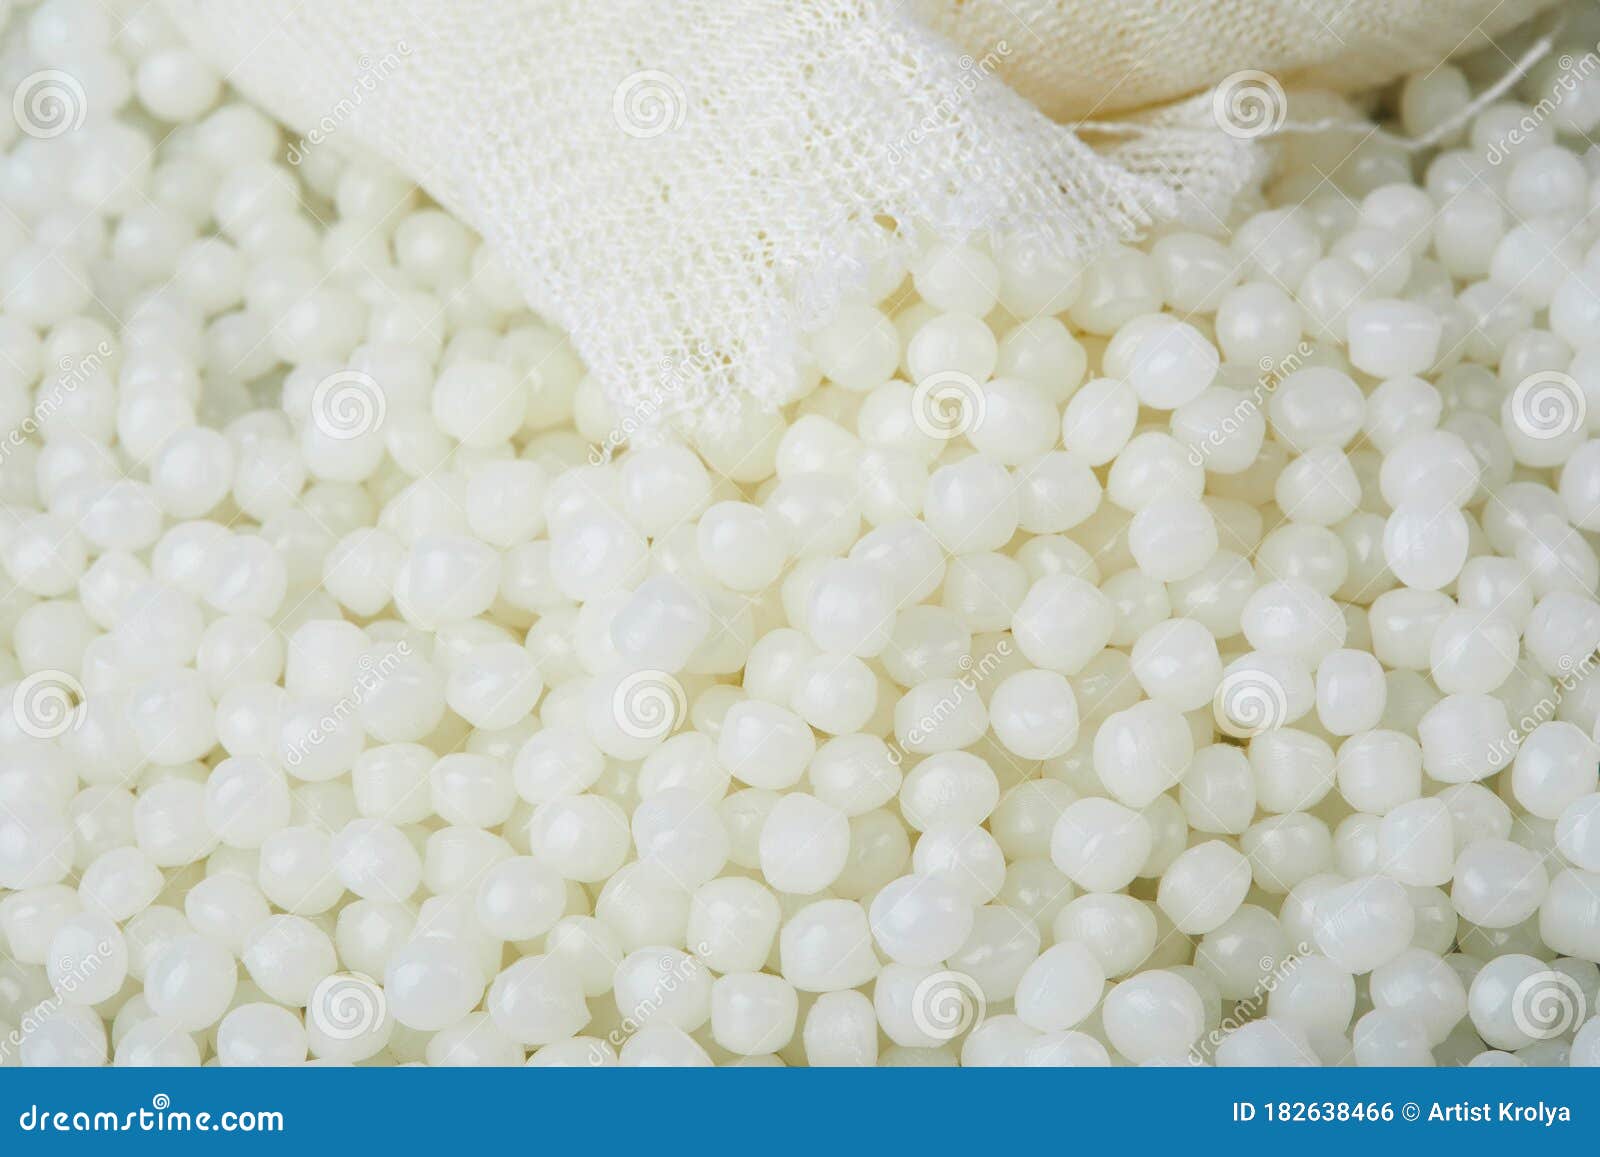 white pet granules, polymer resin, plastic granulate for injection molding process.